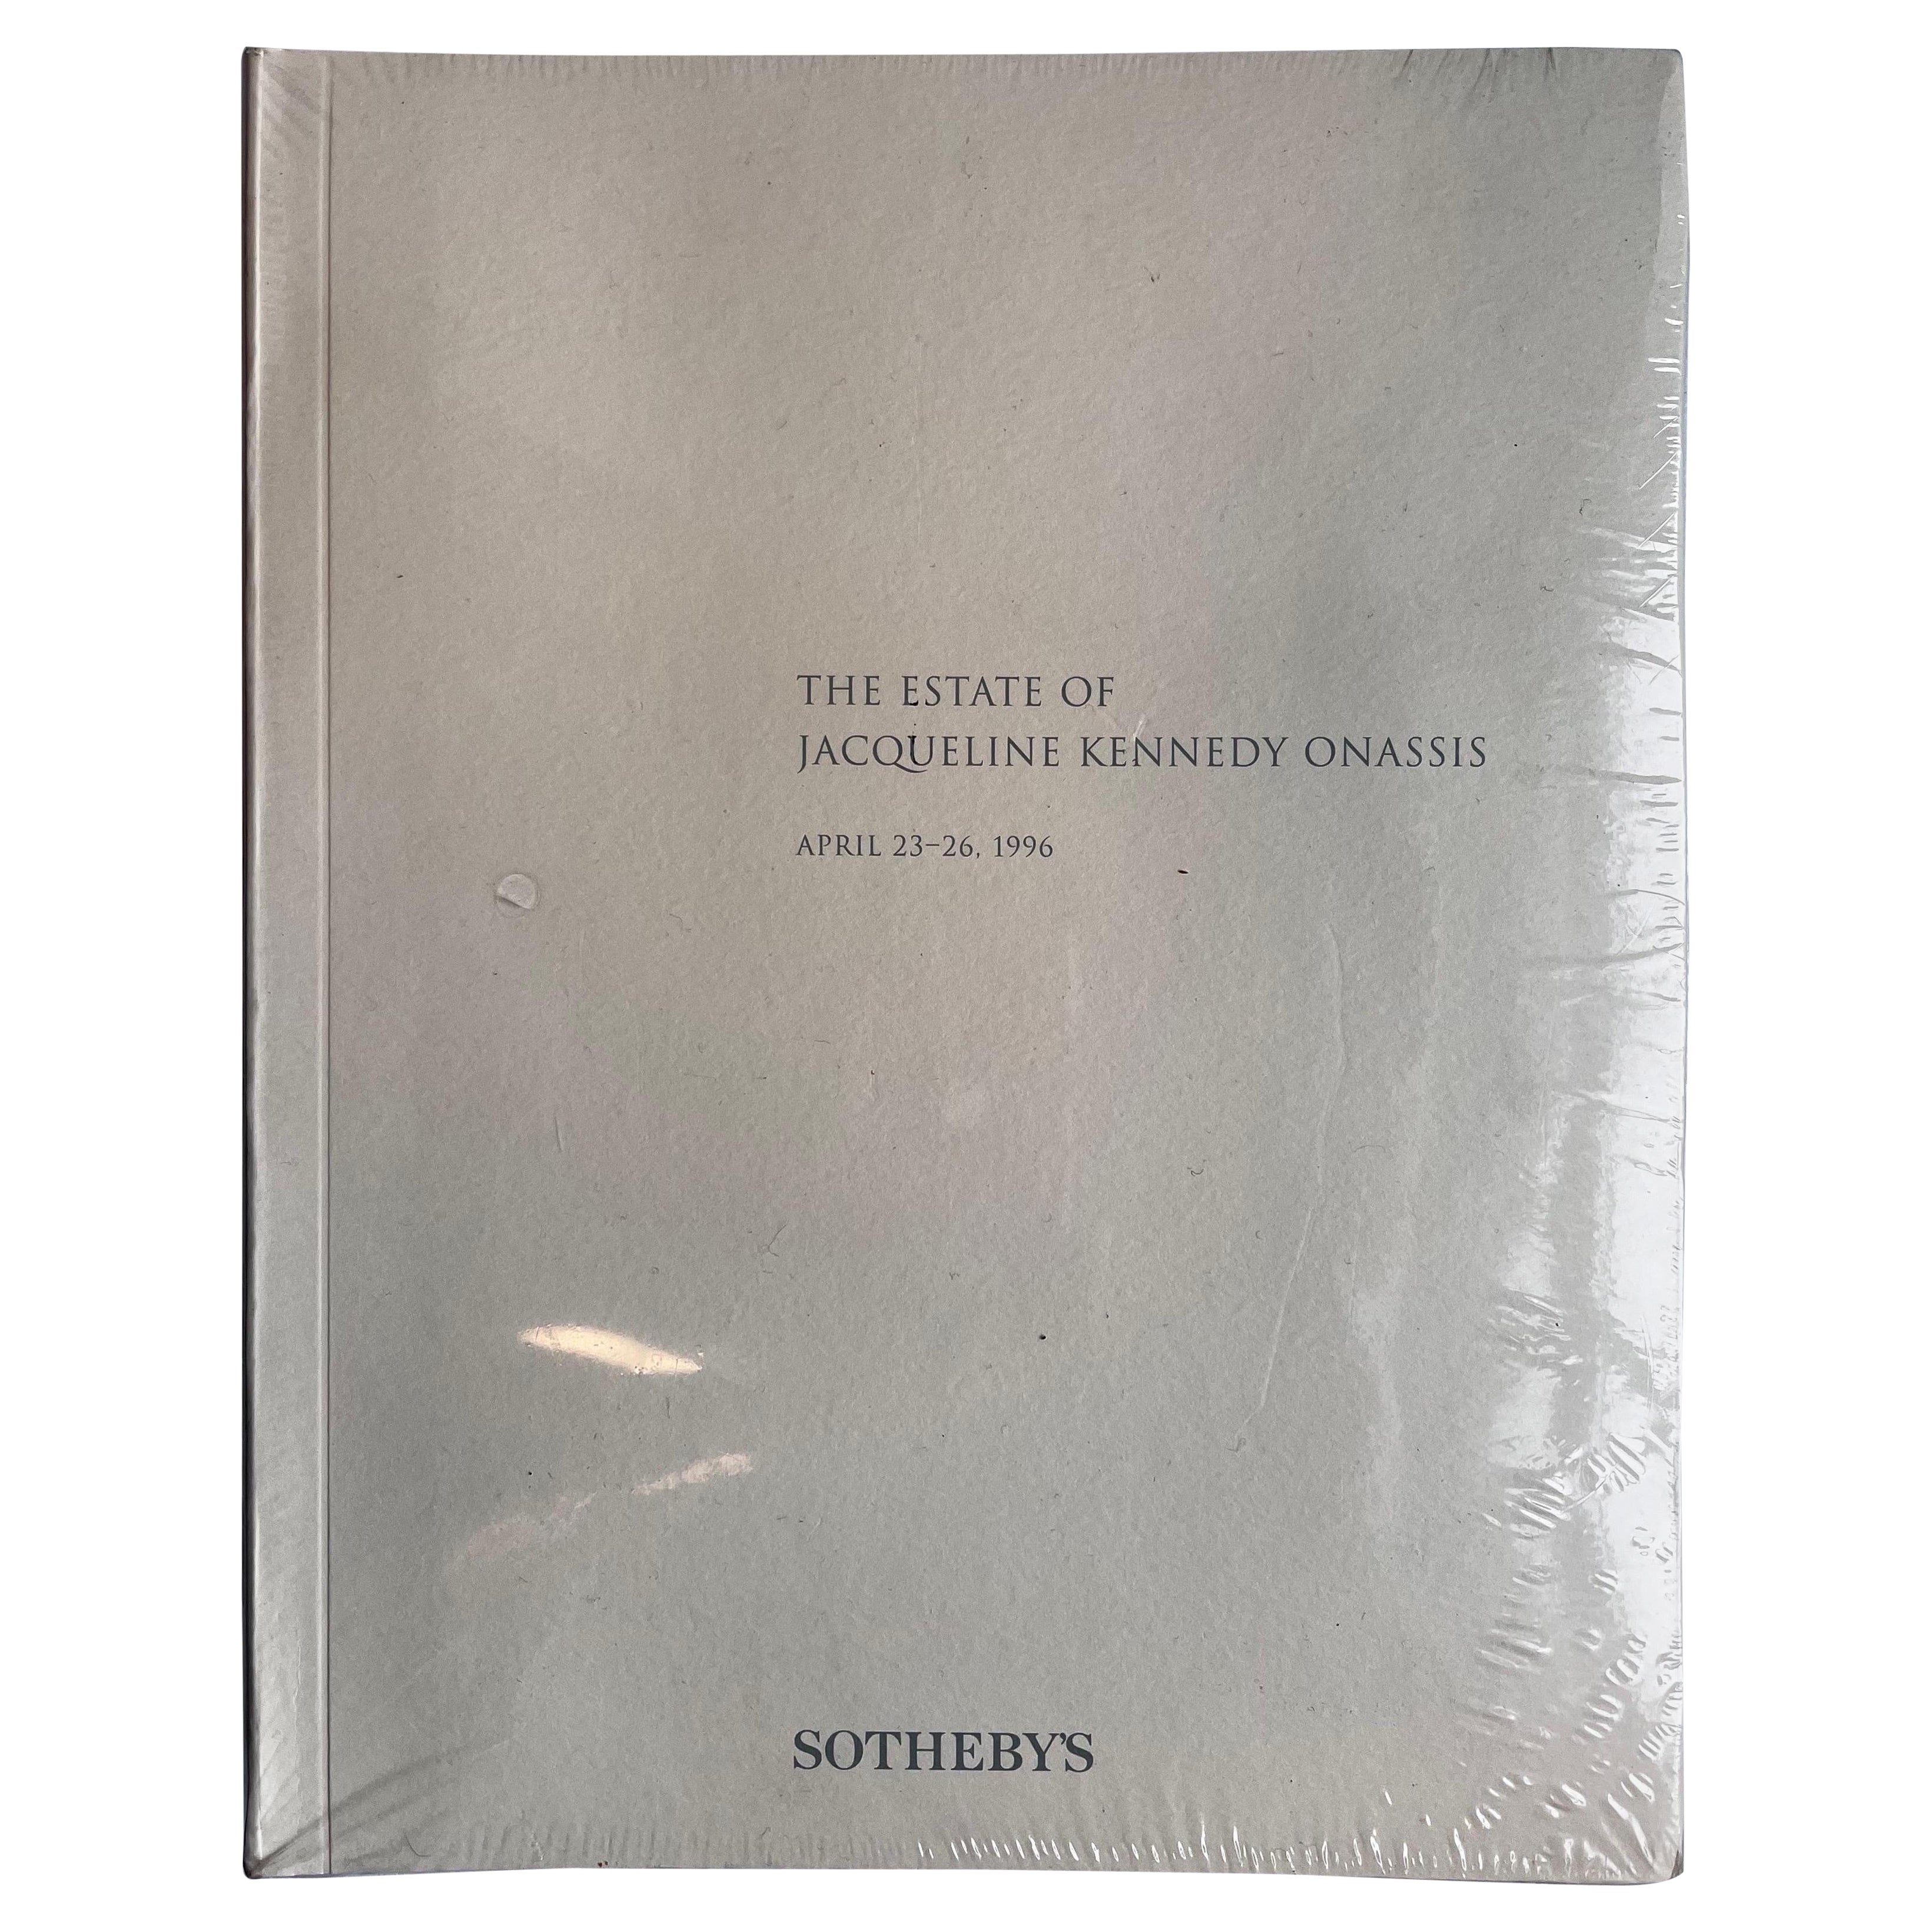 Jacqueline Kennedy Onassis, Sotheby's Auction Catalogue, New in Wrapper